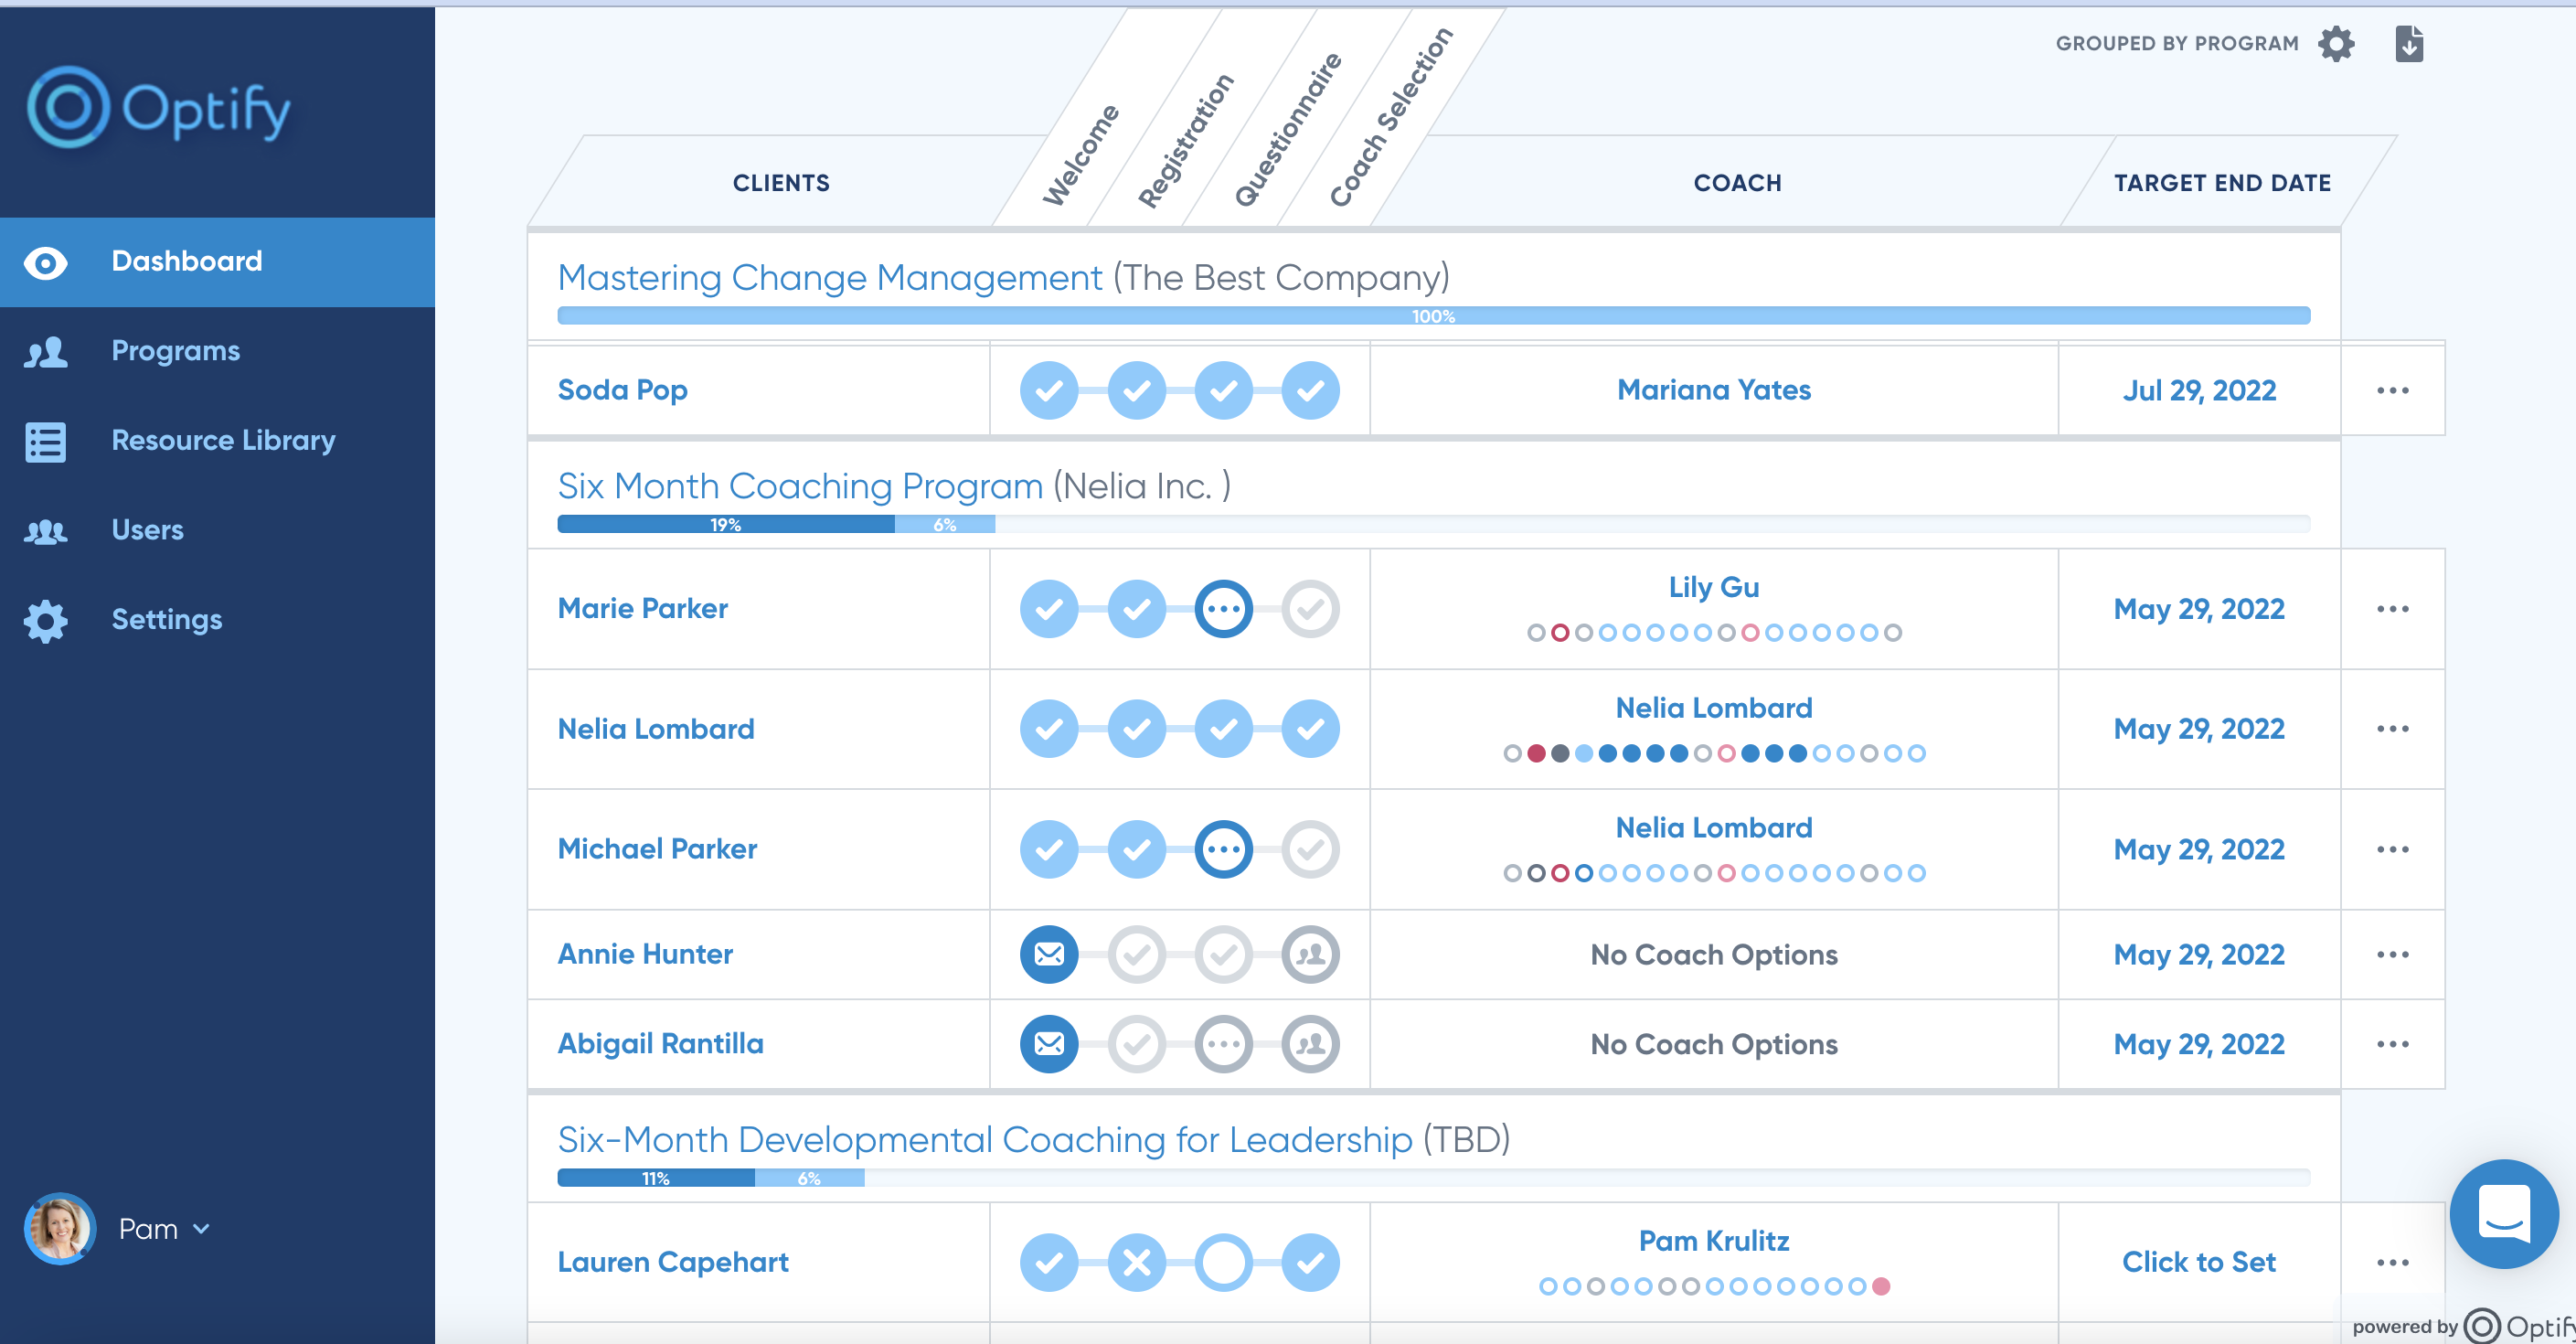 Extensive dashboards that provide visibility into the non-confidential aspects of coaching to program managers and sponsors, including status of programs, engagements, events and coaches.